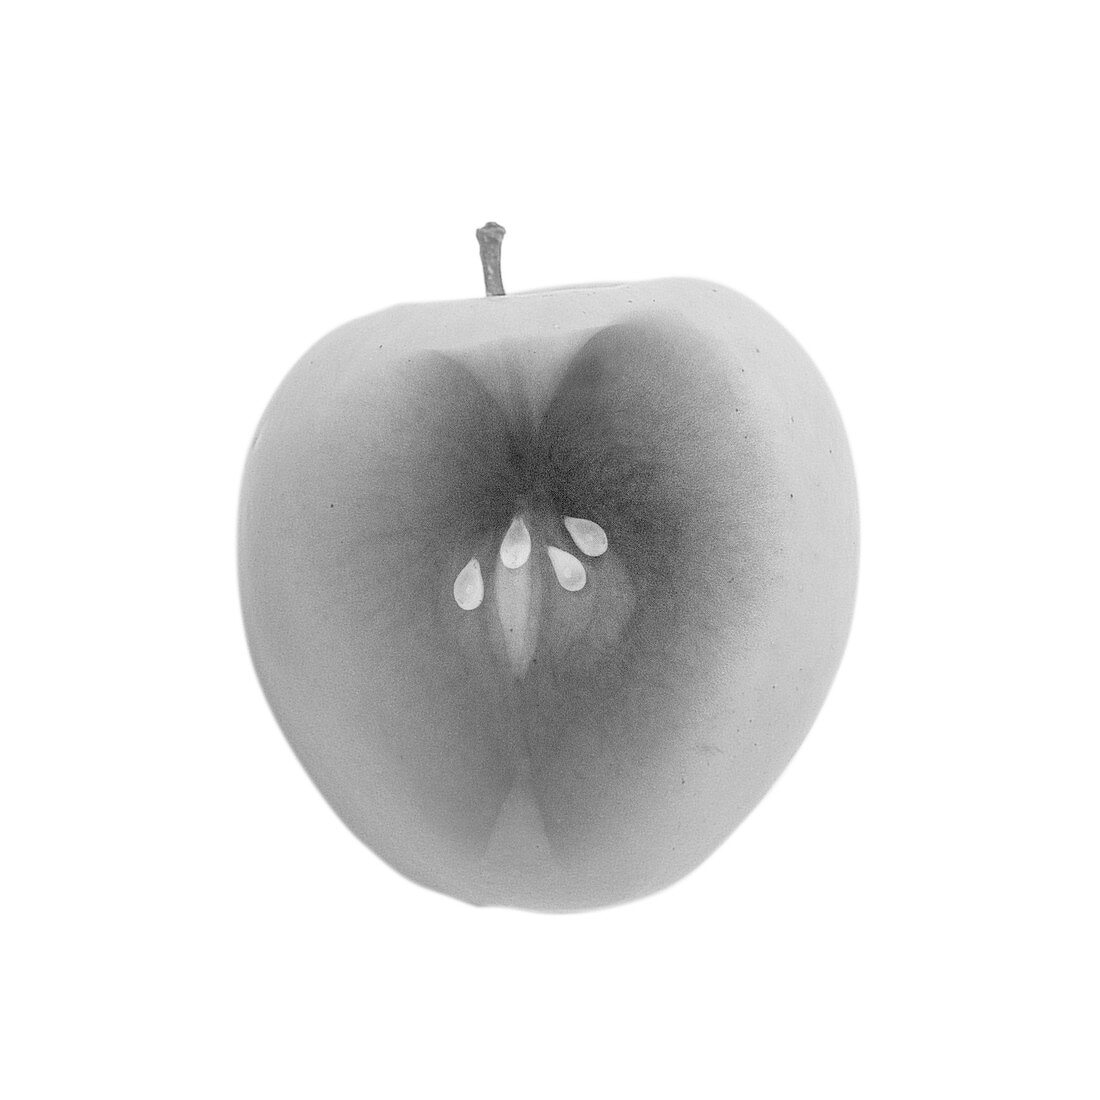 Cross section of an apple, X-ray